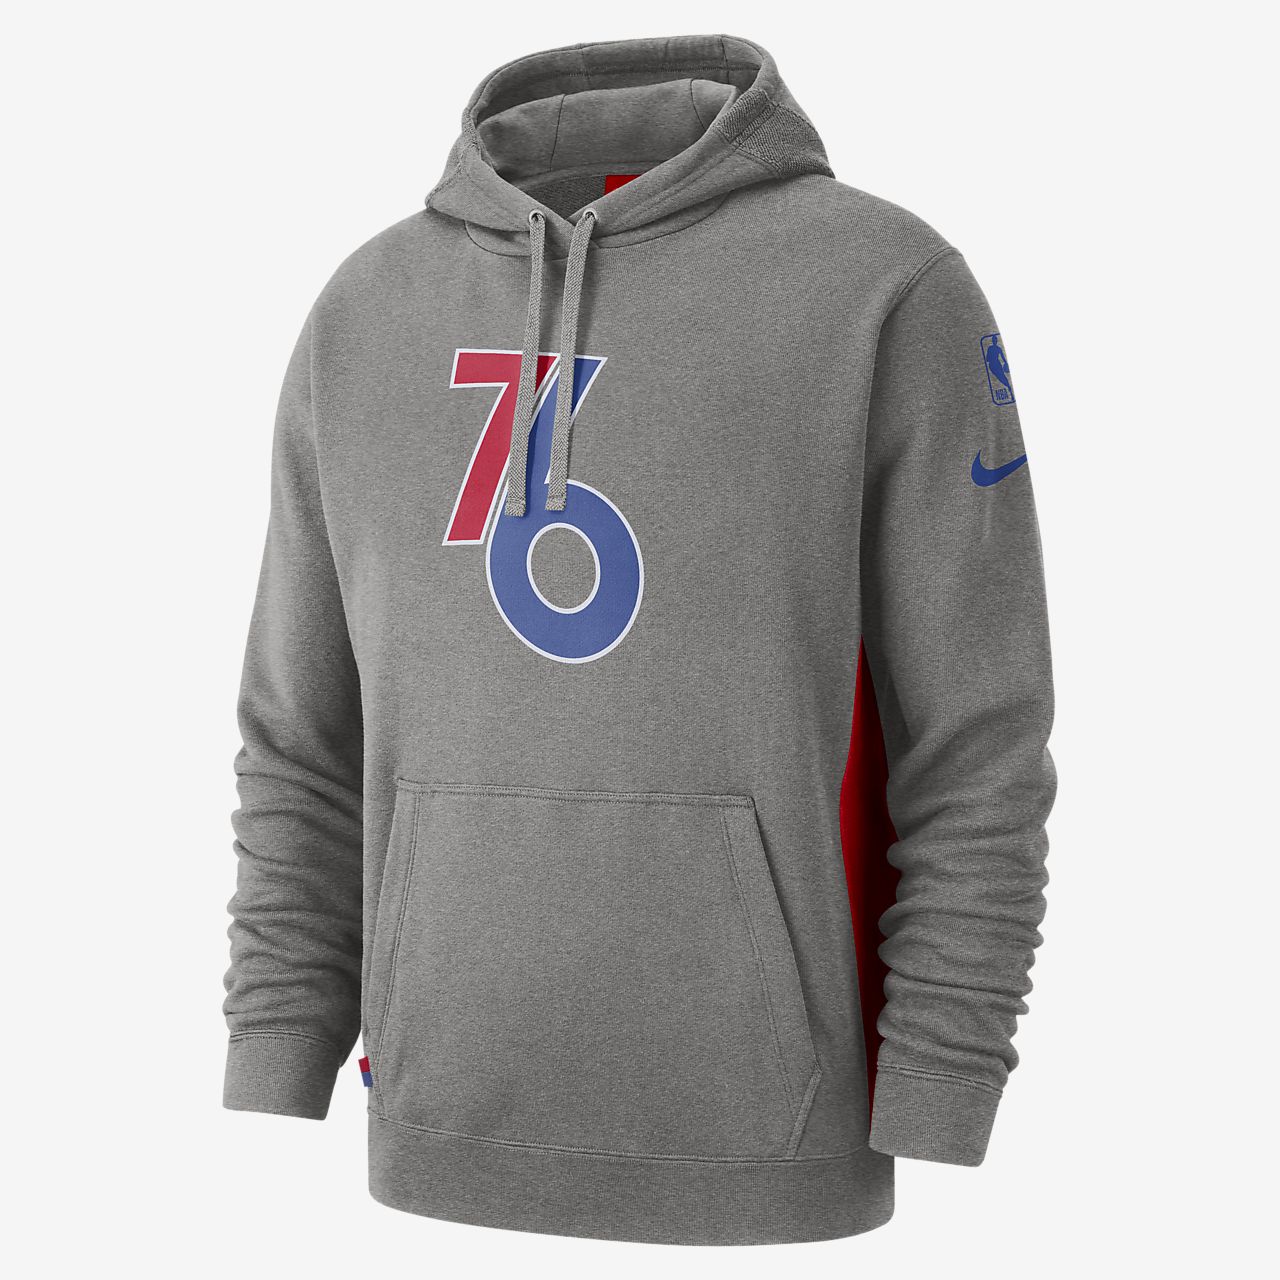 sixers nike hoodie,Cheap,OFF 71%,isci-academy.com